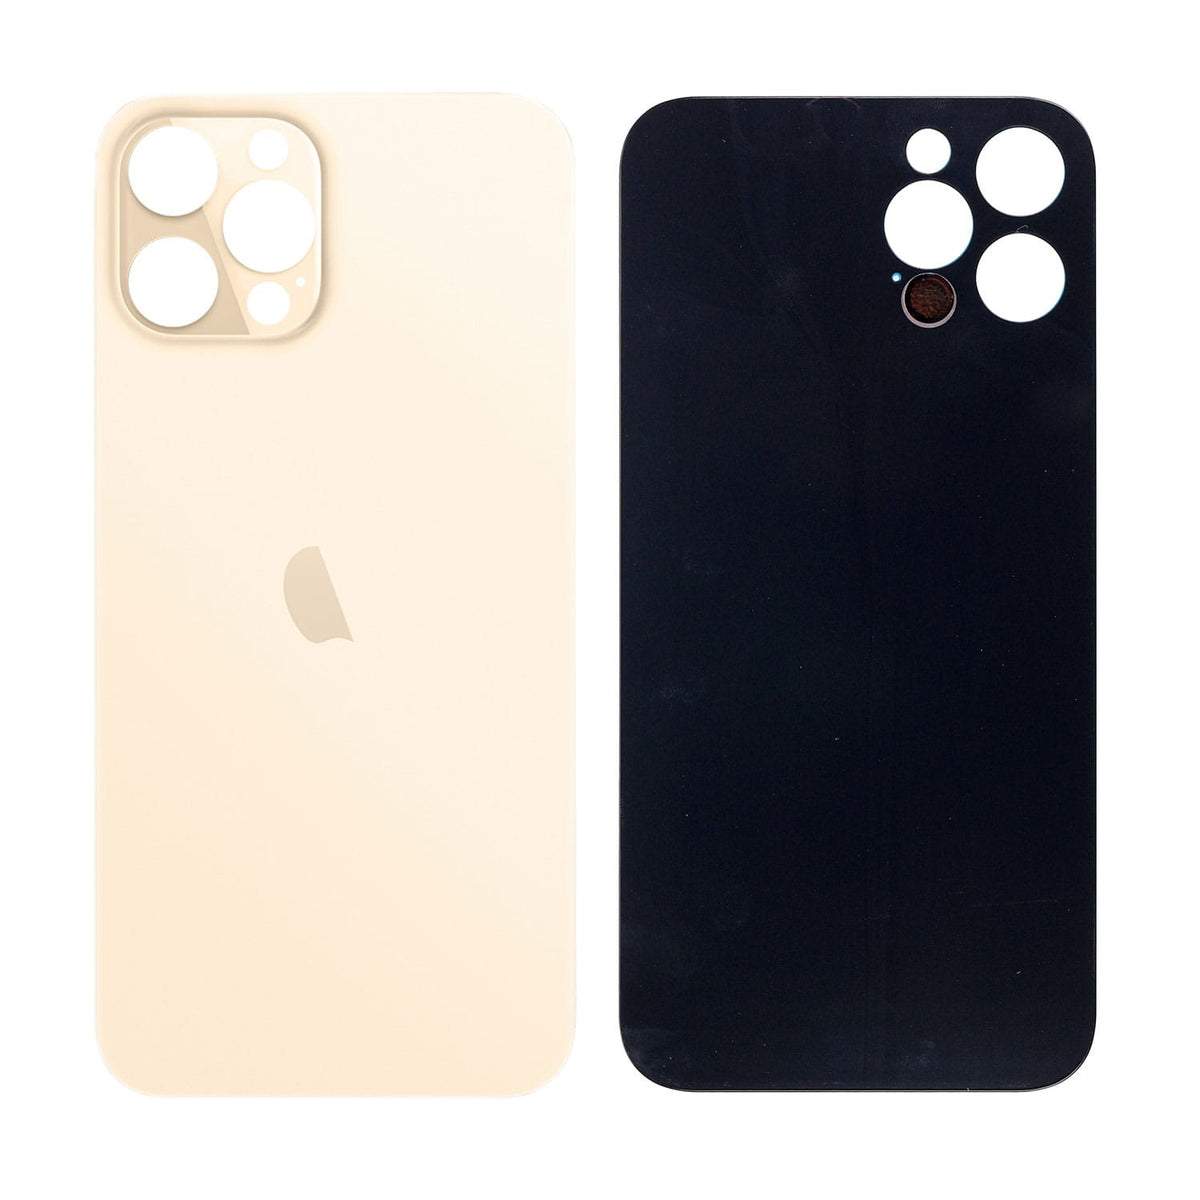 GOLD BACK COVER FOR IPHONE 12 PRO